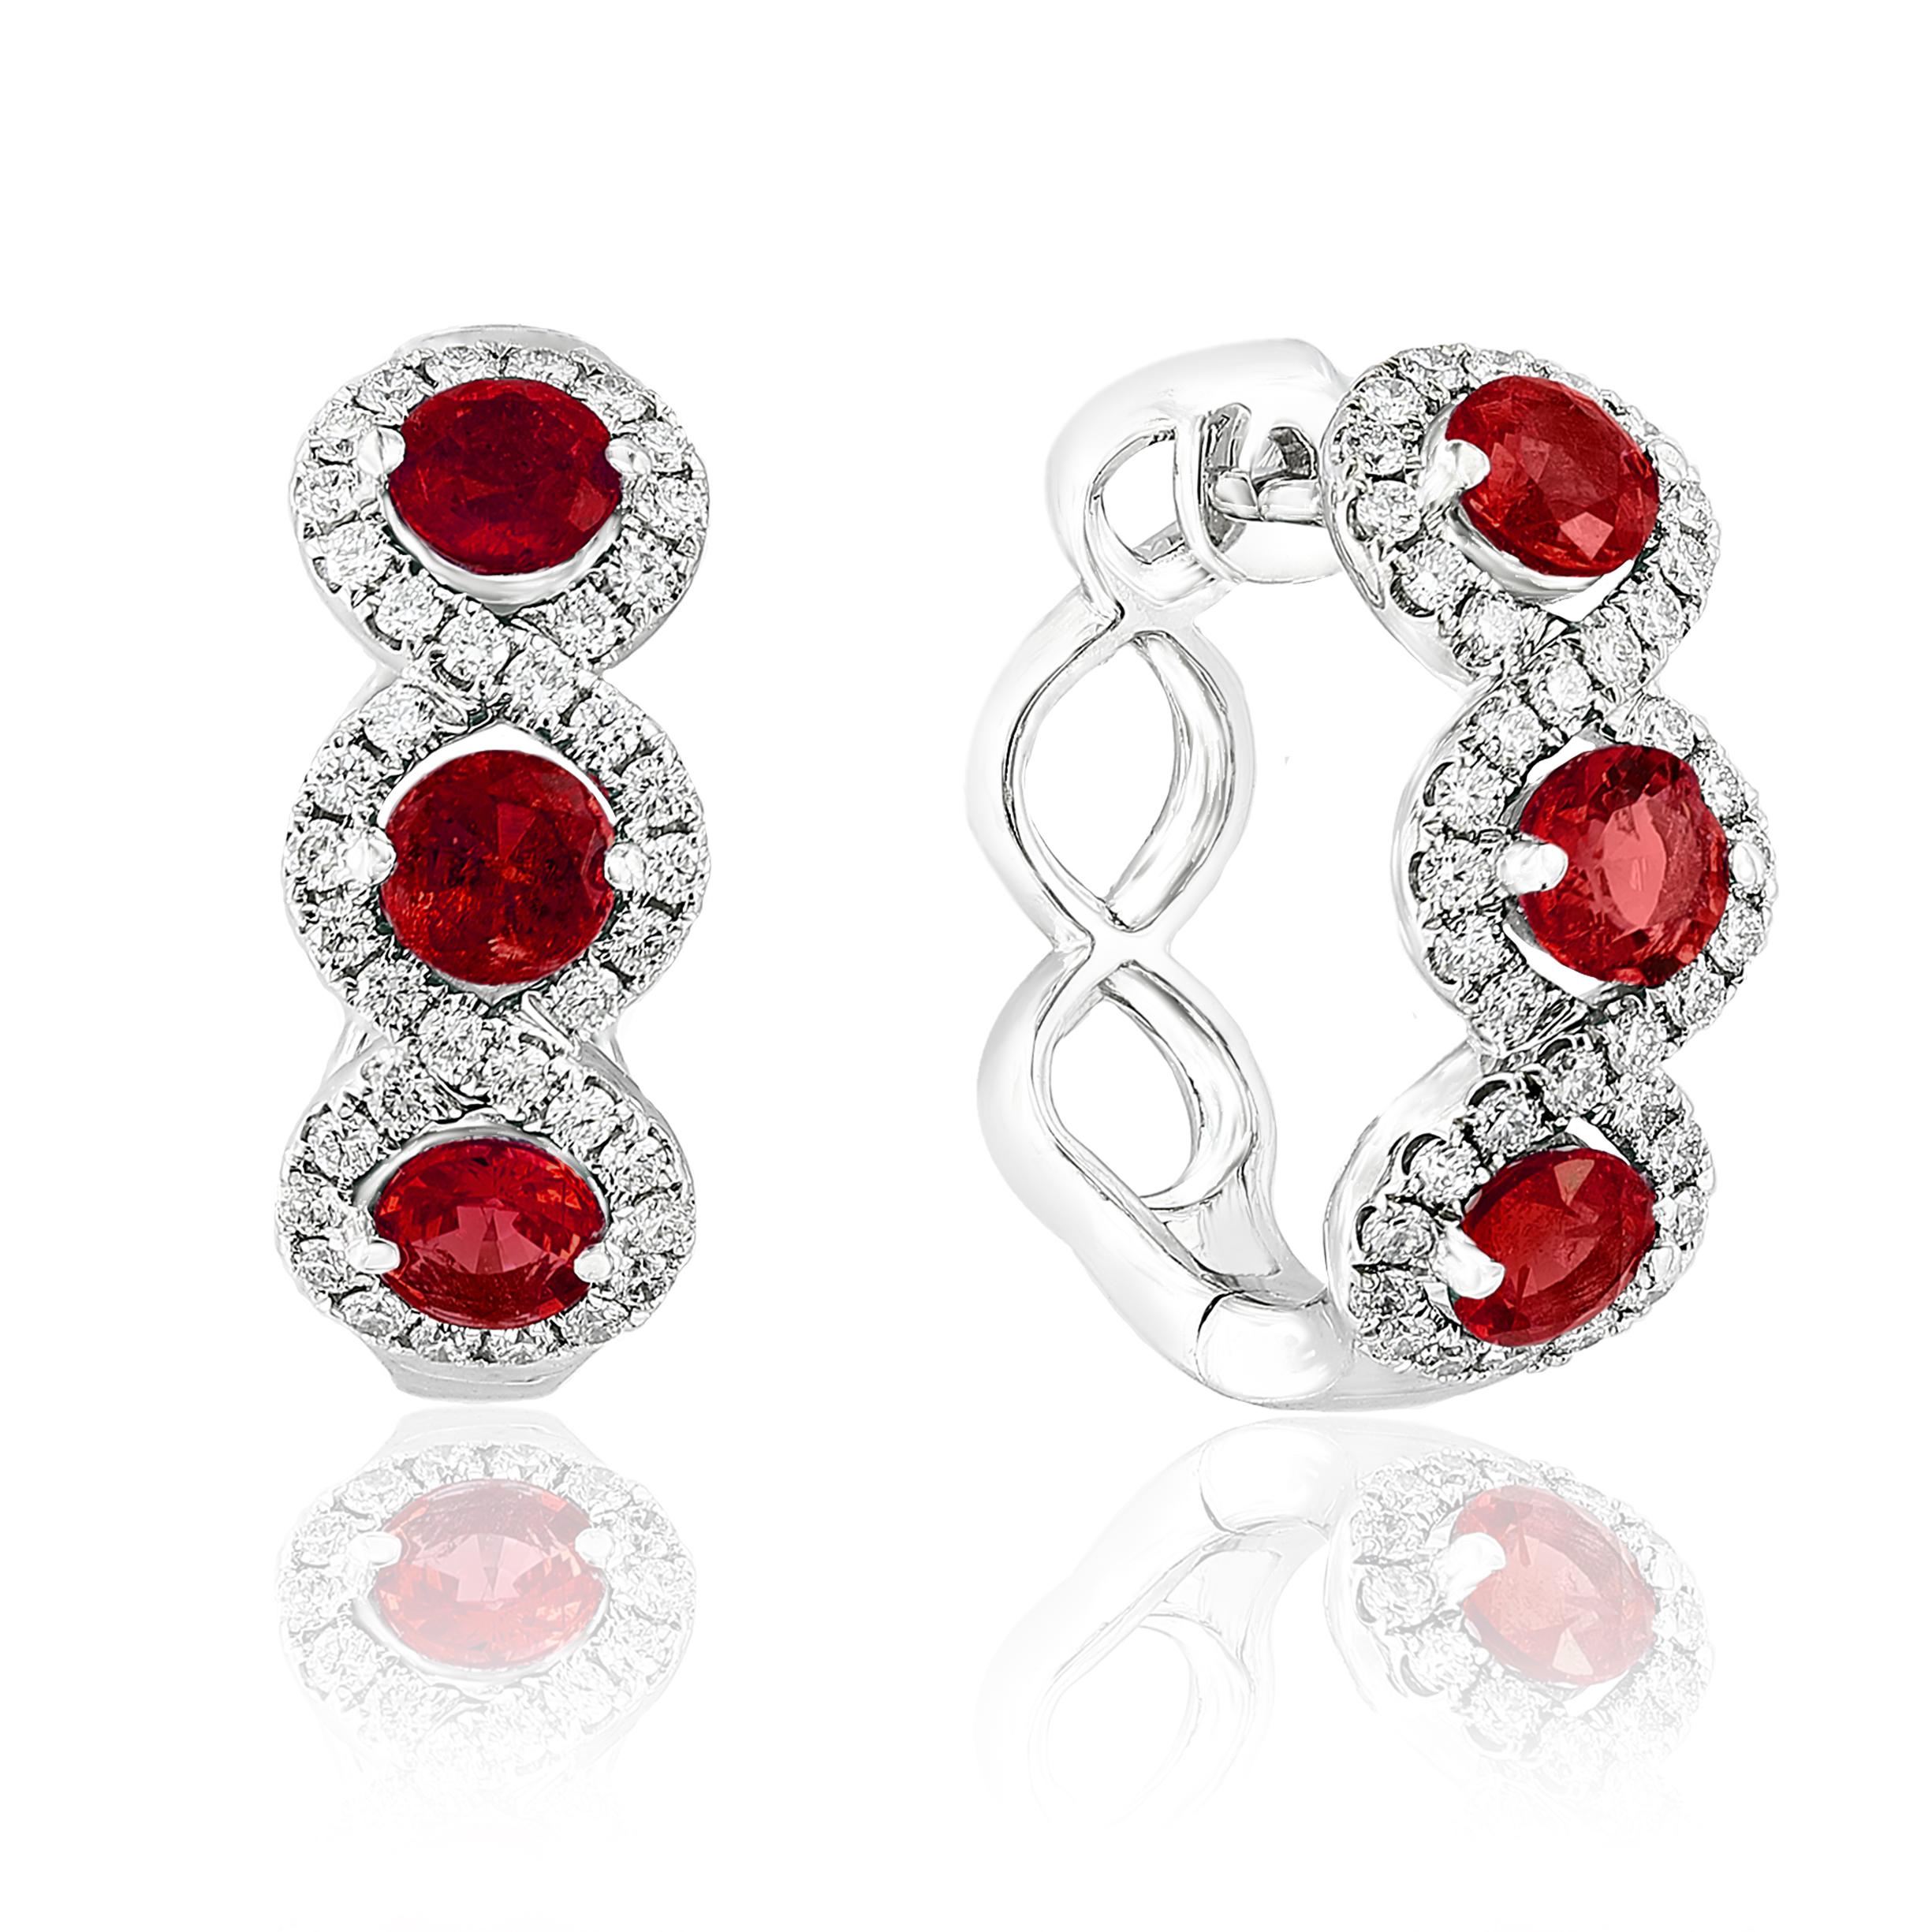 A chic and fashionable pair of hoop earrings showcasing brilliant-cut 6-round rubies weighs 1.68 carats in total, set in 18k white gold.  76 Round diamonds surrounding the rubies weigh 0.65 carats in total. A beautiful piece of jewelry.

Style is